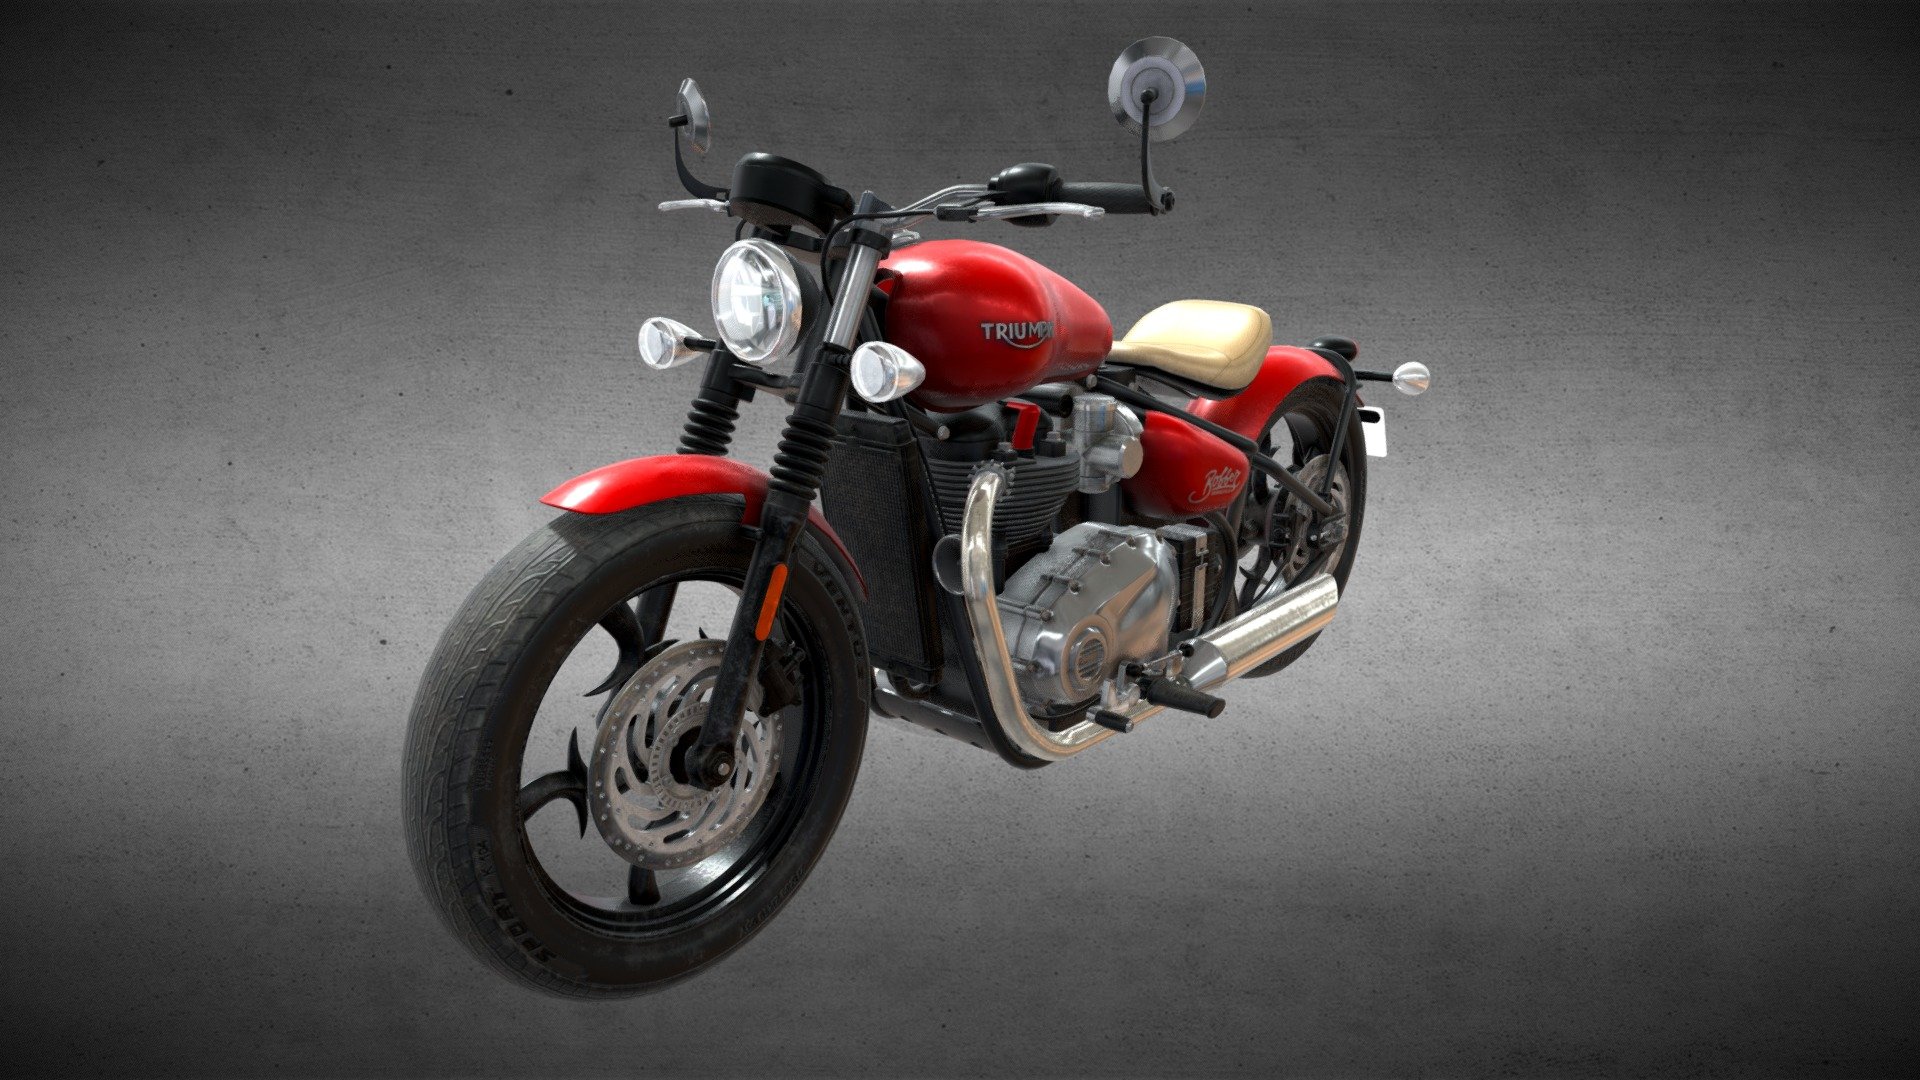 This is the model of Triumph Bonneville Bobber 2017, a bobber-style cruiser motorcycle.

The model has a clean topology and a premium look to enhance detail and add realism to any scene or project.

The model was created in Maya 2014 and is also available in max, fbx and obj formats for importing into any software or game engine.

UVs are fully unwrapped and non overlapping. The textures have been created inside Substance Painter and support PBR rendering. There are five types of textures - Diffuse, Occlusion, Normal, Metallic and Roughness.

File Details

Clean topology, optimized geometry

Clean heirarchy with logical naming and easy to use grouping

Unit is set to centimeter (cm). Real-world scale.

UVs unwrapped, non-overlapping

PBR support

Formats available: .ma, .mb, .obj, .fbx, .max

Tris count:  224410

Texture format: 4096x4096 PNG

Texture types: Diffuse, Normal, Occlusion, Metallic, Roughness

Hope you like the model!




Digital Agents Interactive Pvt Ltd
 - Triumph Bonneville Bobber 2017 - 3D model by Digital Agents Interactive Pvt Ltd (@DigitalAgents) 3d model